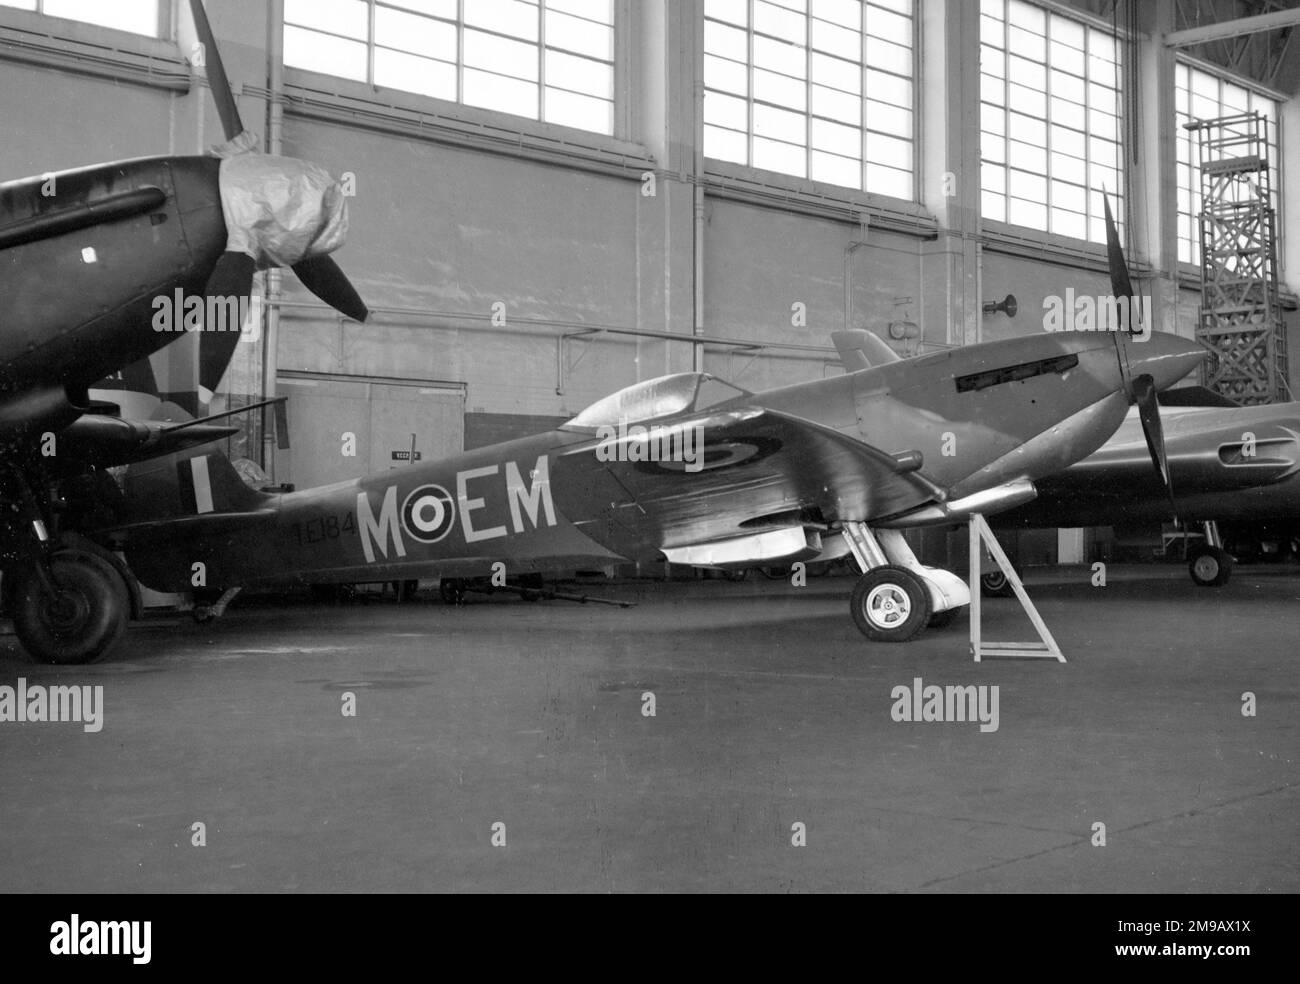 Supermarine Spitfire LF Mk.XVIE TE184 'M - EM', ex Royal Air Force, in the RAF Museum Reserve Collection at RAF Finningley, sandwiched between the sole surviving Boulton Paul Defiant, and an Avro 707. Stock Photo